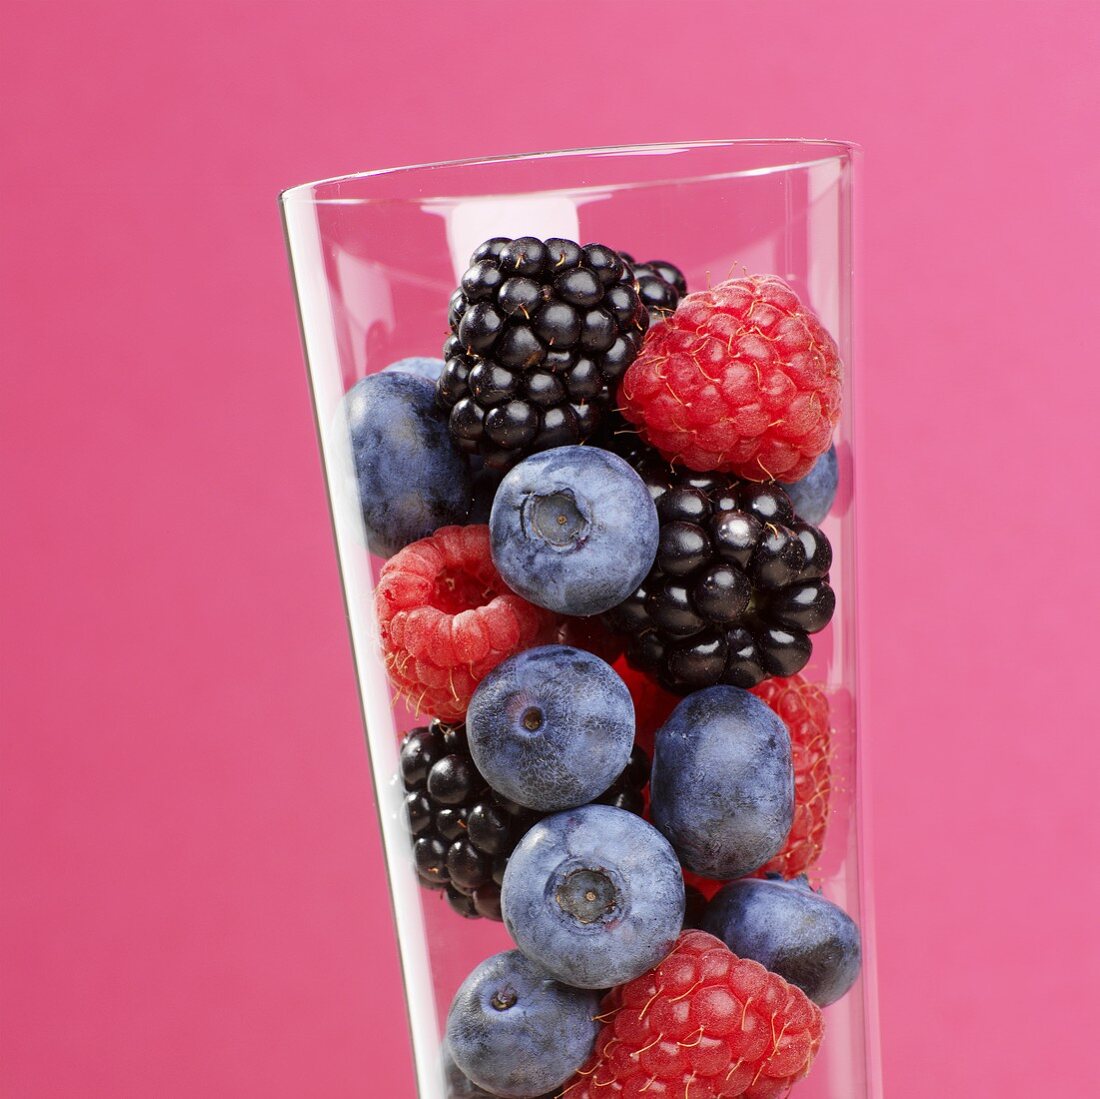 Various berries in a glass